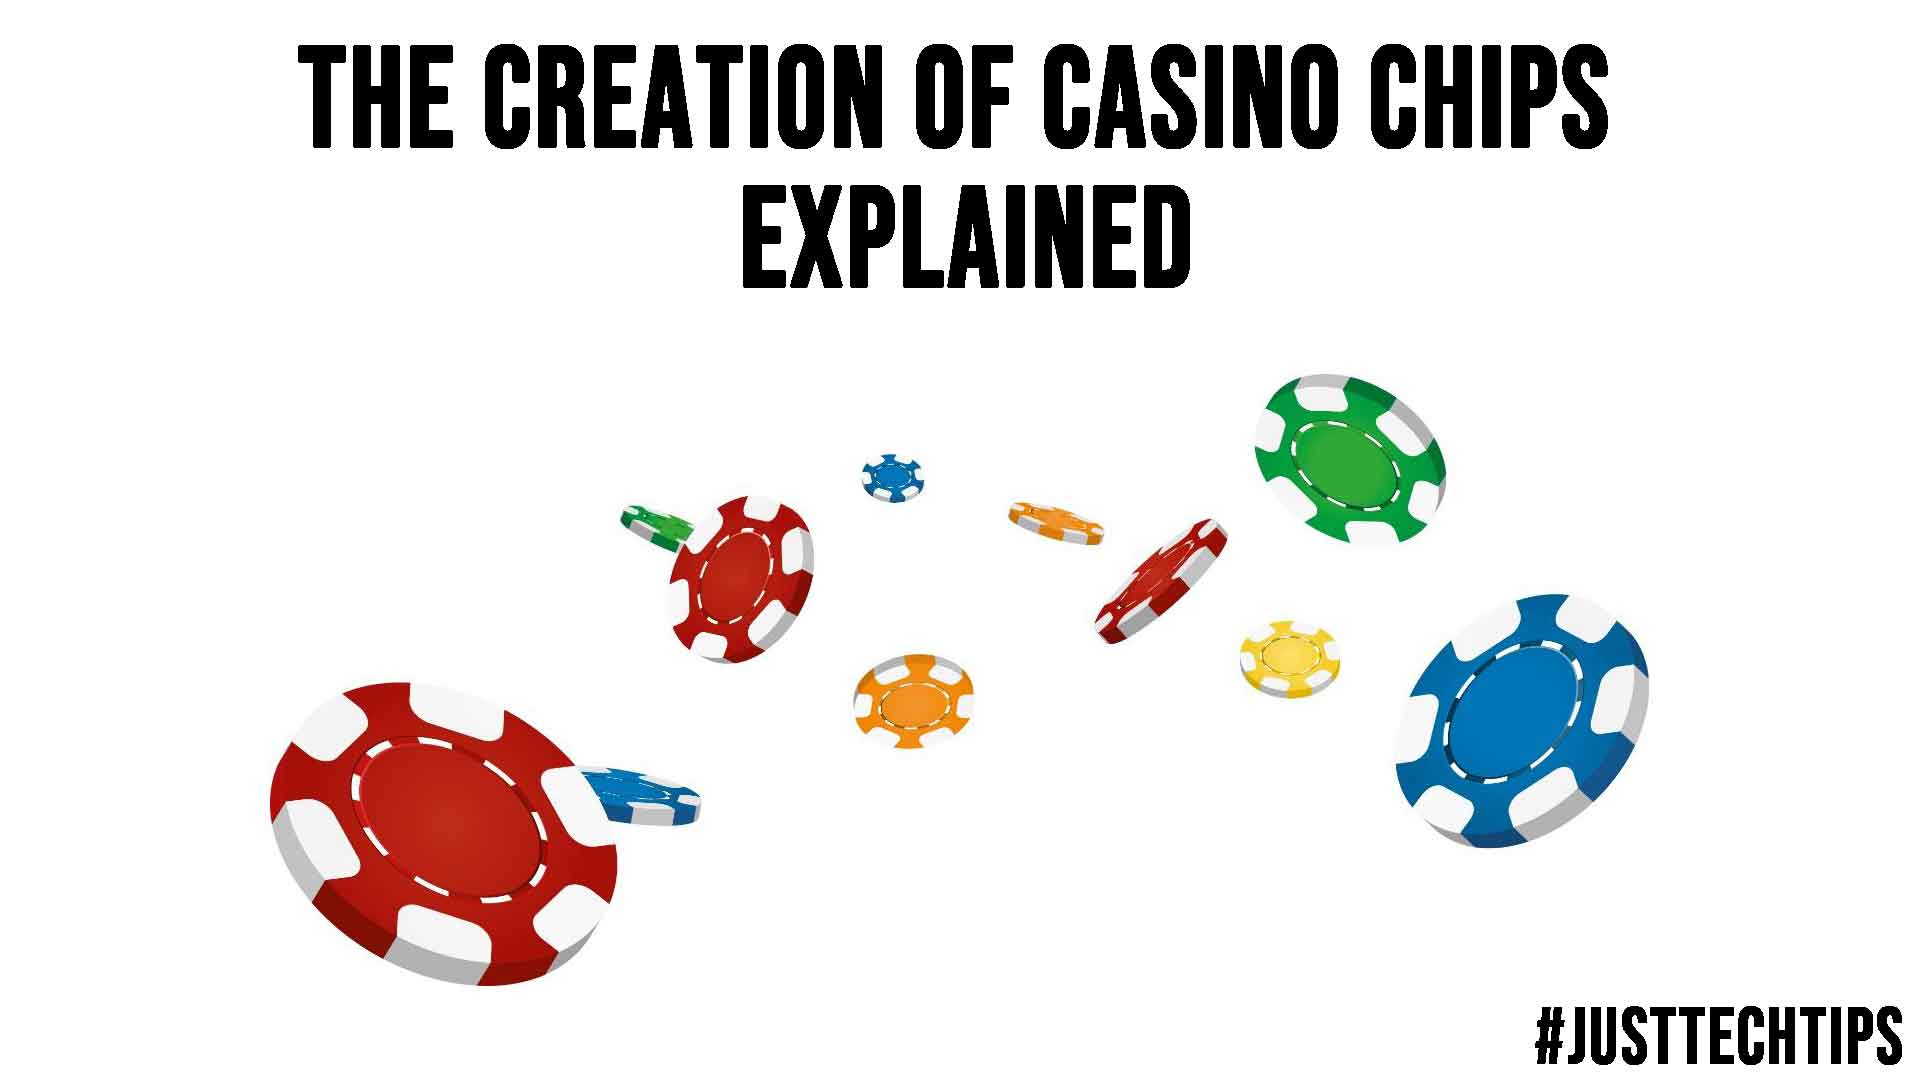 The Creation of Casino Chips Explained